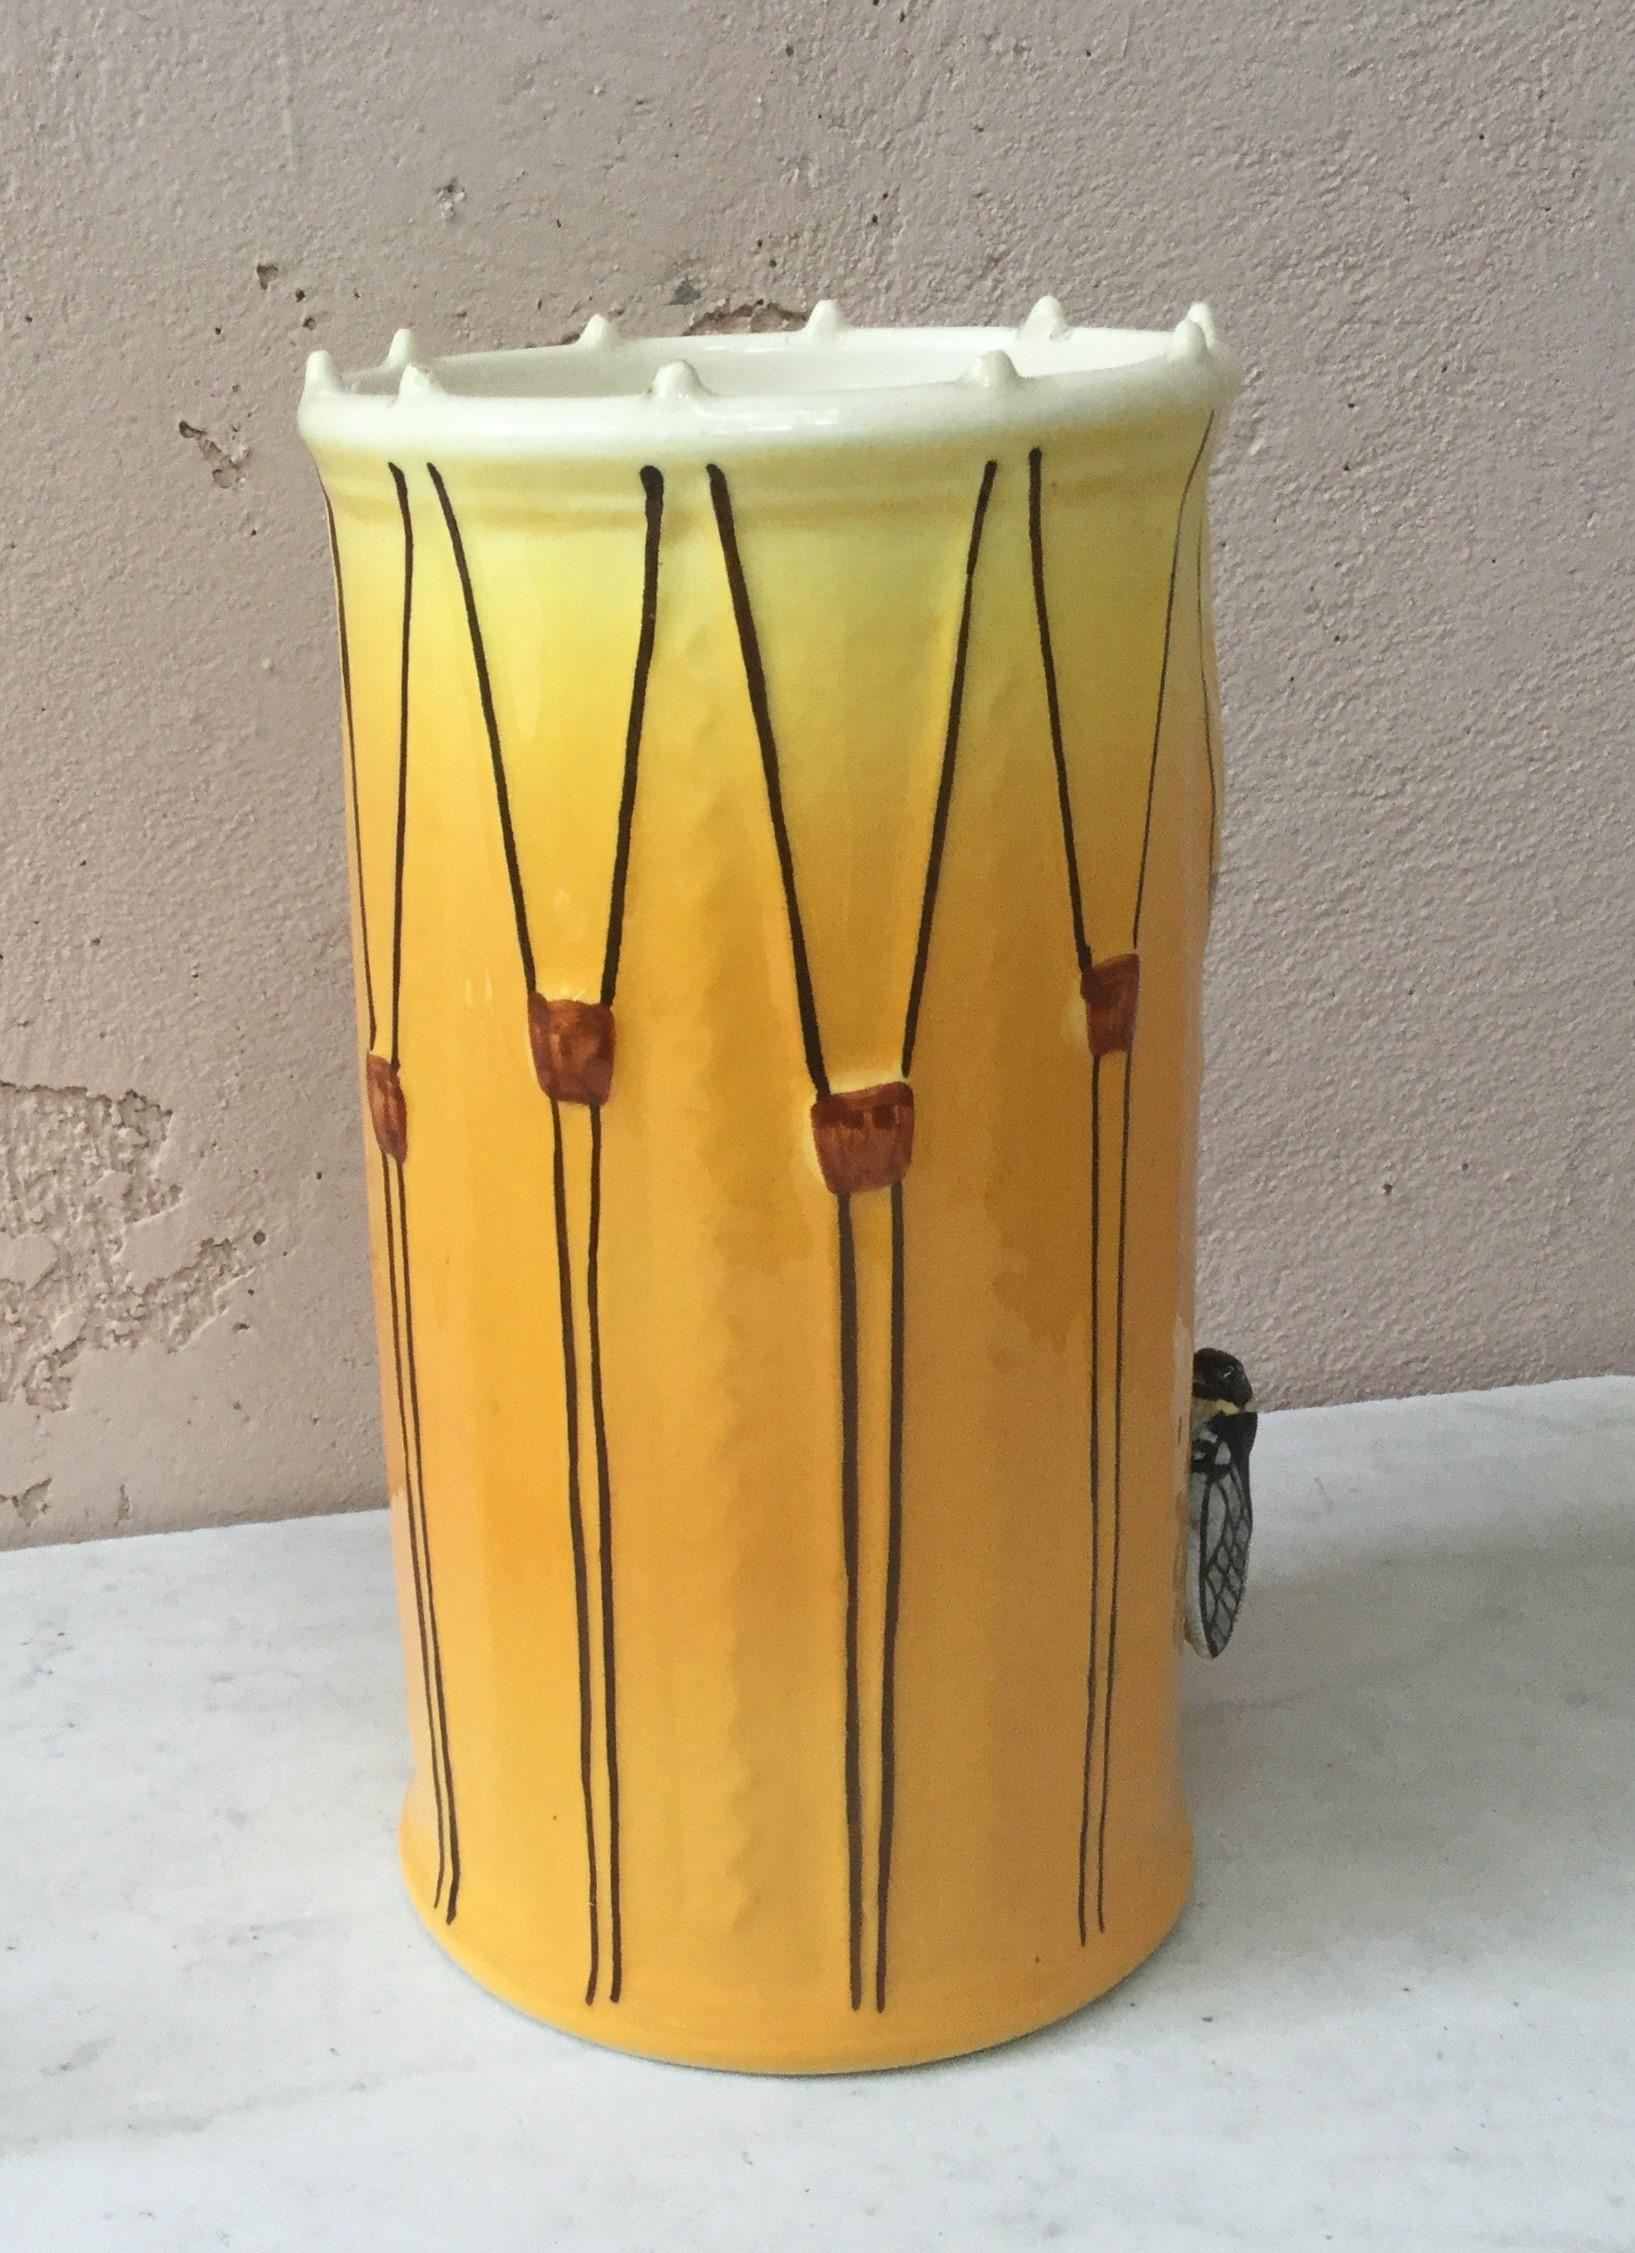 Large majolica drum vase with cicadas signed Sicard, circa 1950.
From South of France (Provence).